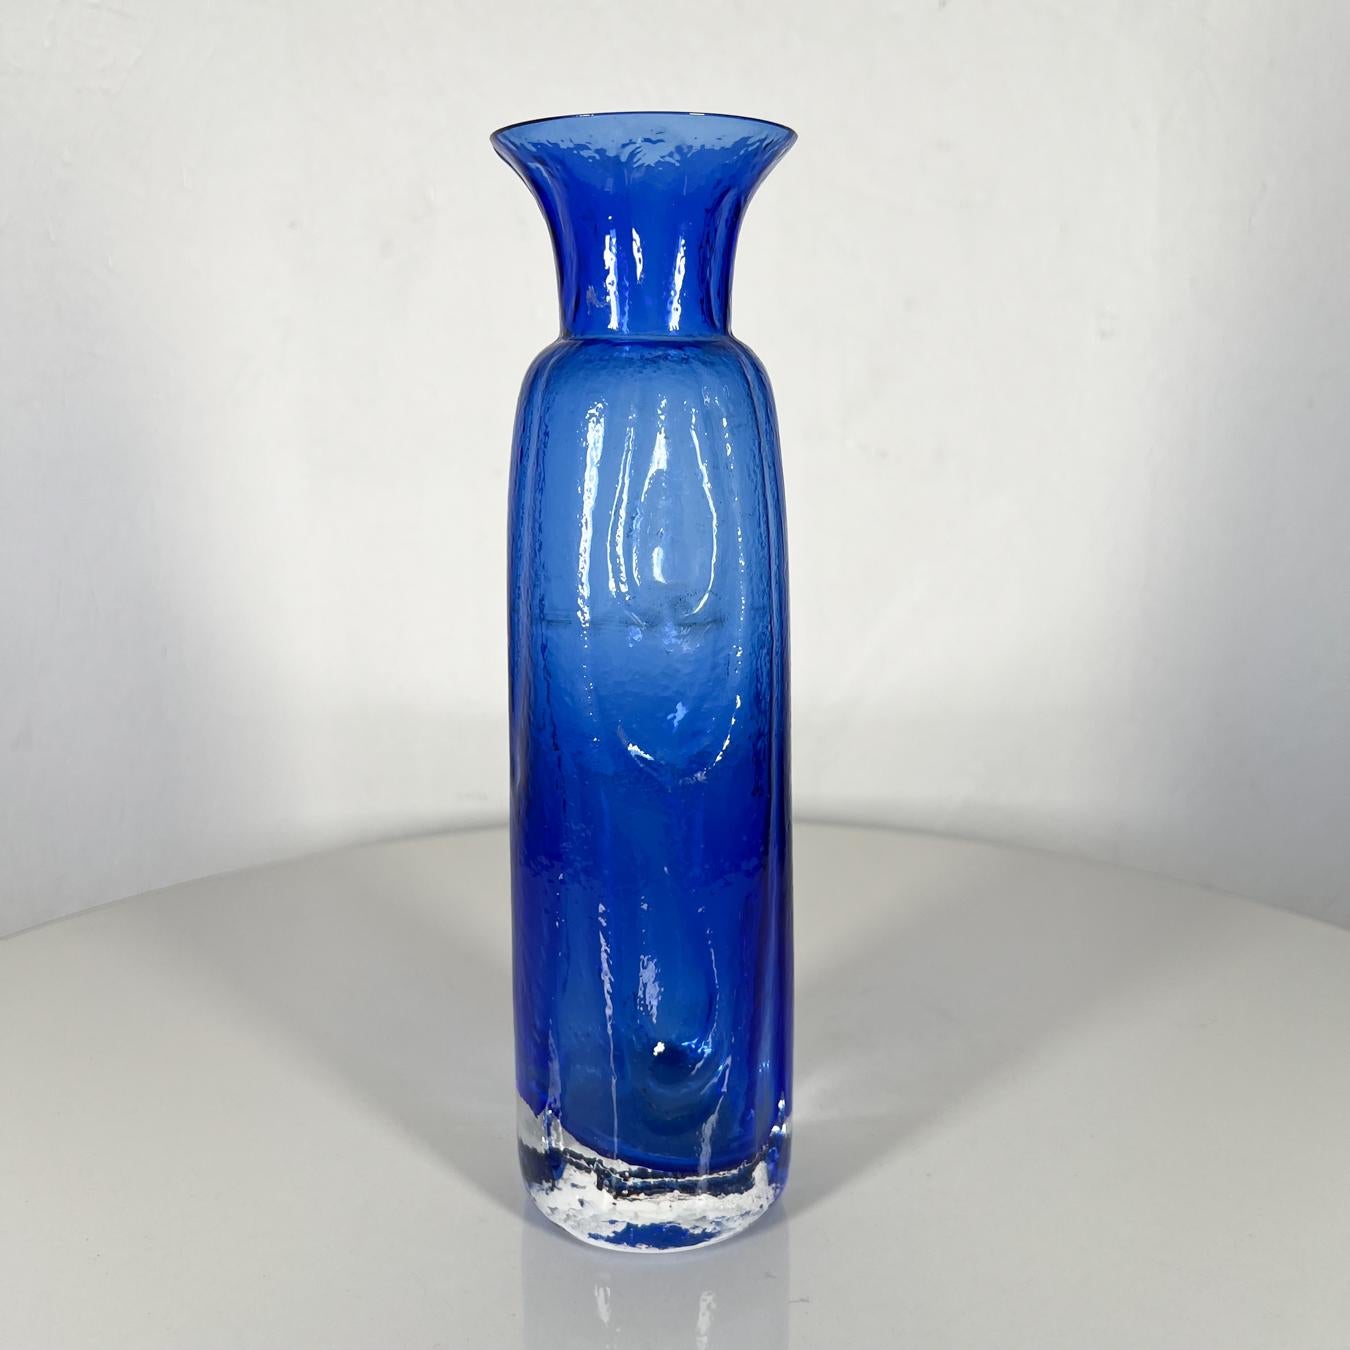 Art glass blue vase modern organic water droplets
Sea Glasbruk Kosta Sweden textured art glass vase by Rune Strand
Cobalt blue tall narrow vase
Measures: 9.75 tall x 2.63 diameter
Preowned unrestored vintage condition
Refer to images provided.